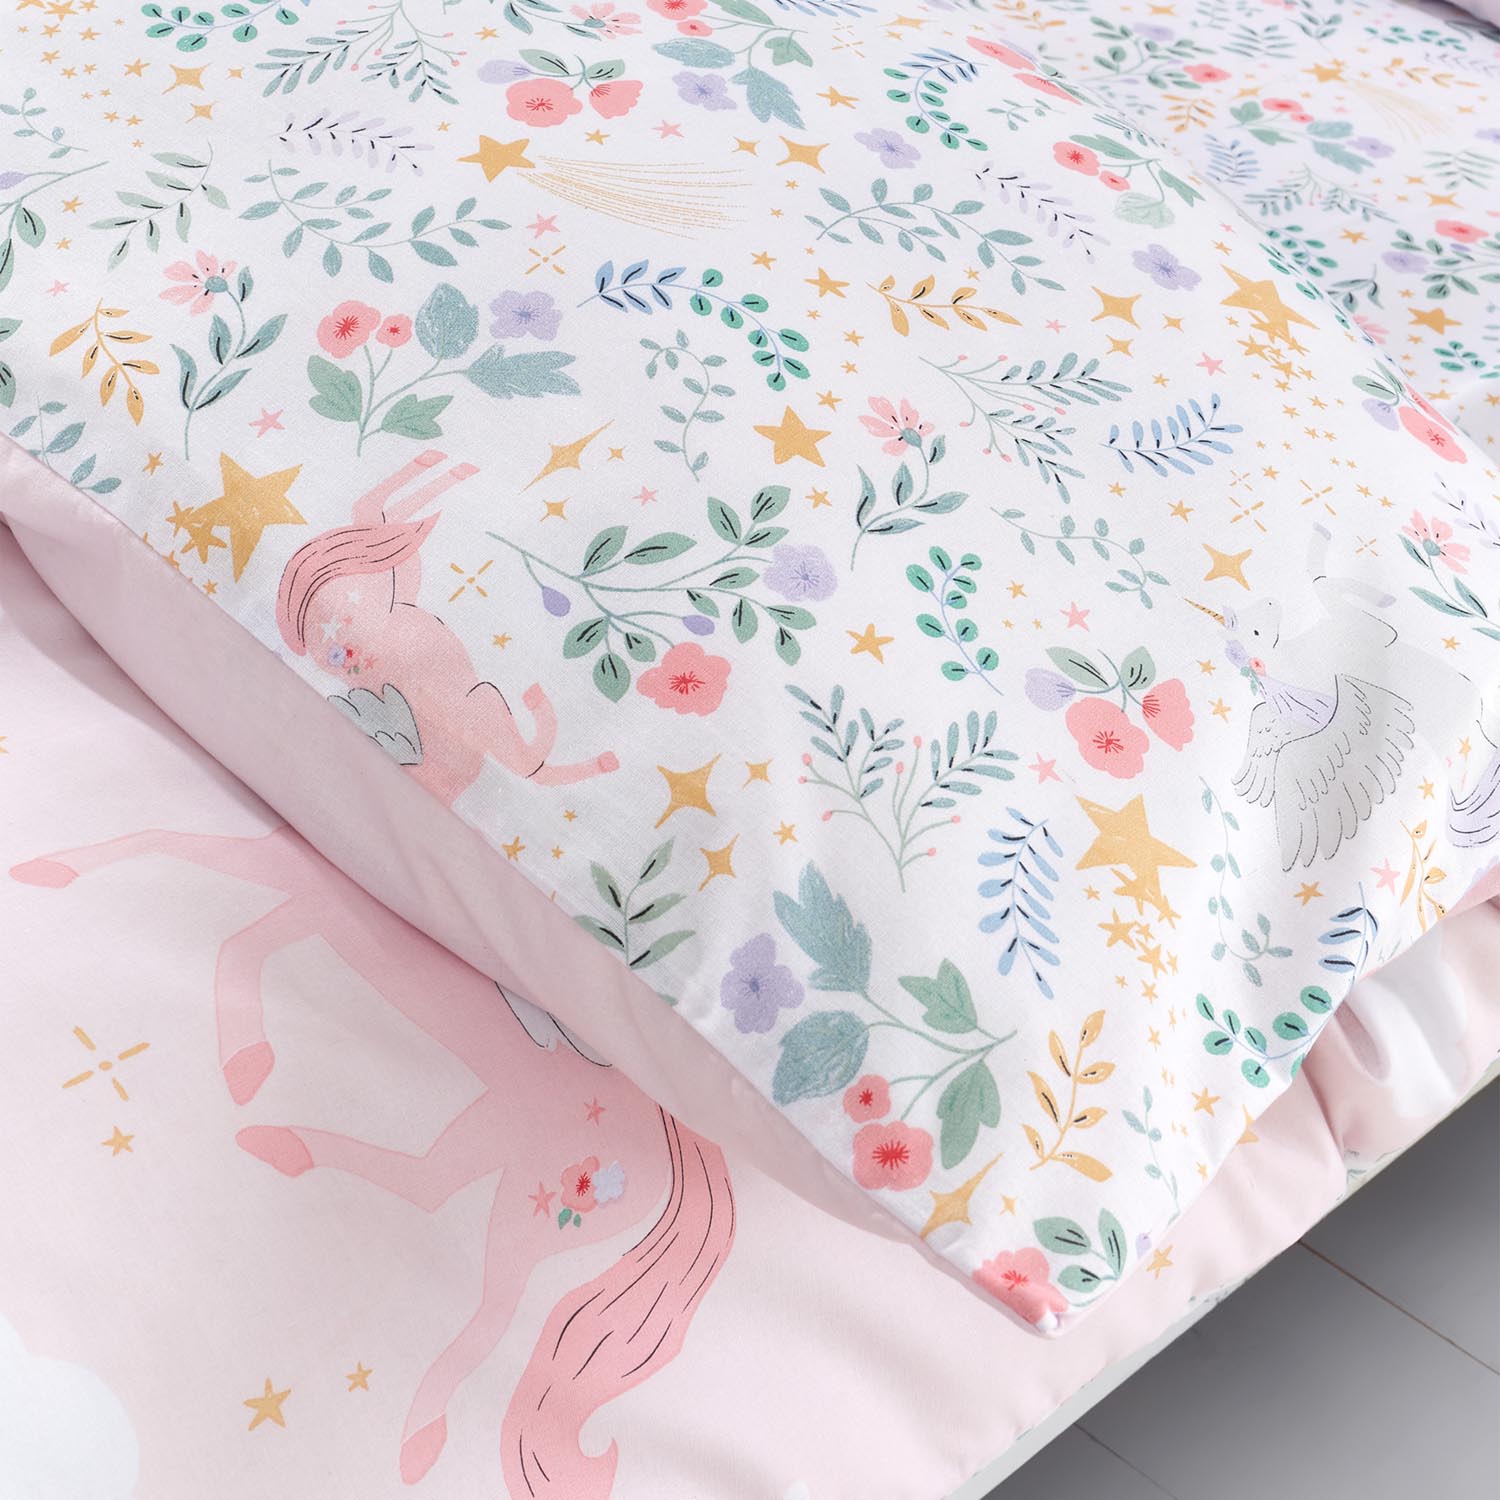 The Home Luxury Collection Magical Unicorn Duvet Cover Set 5 Shaws Department Stores